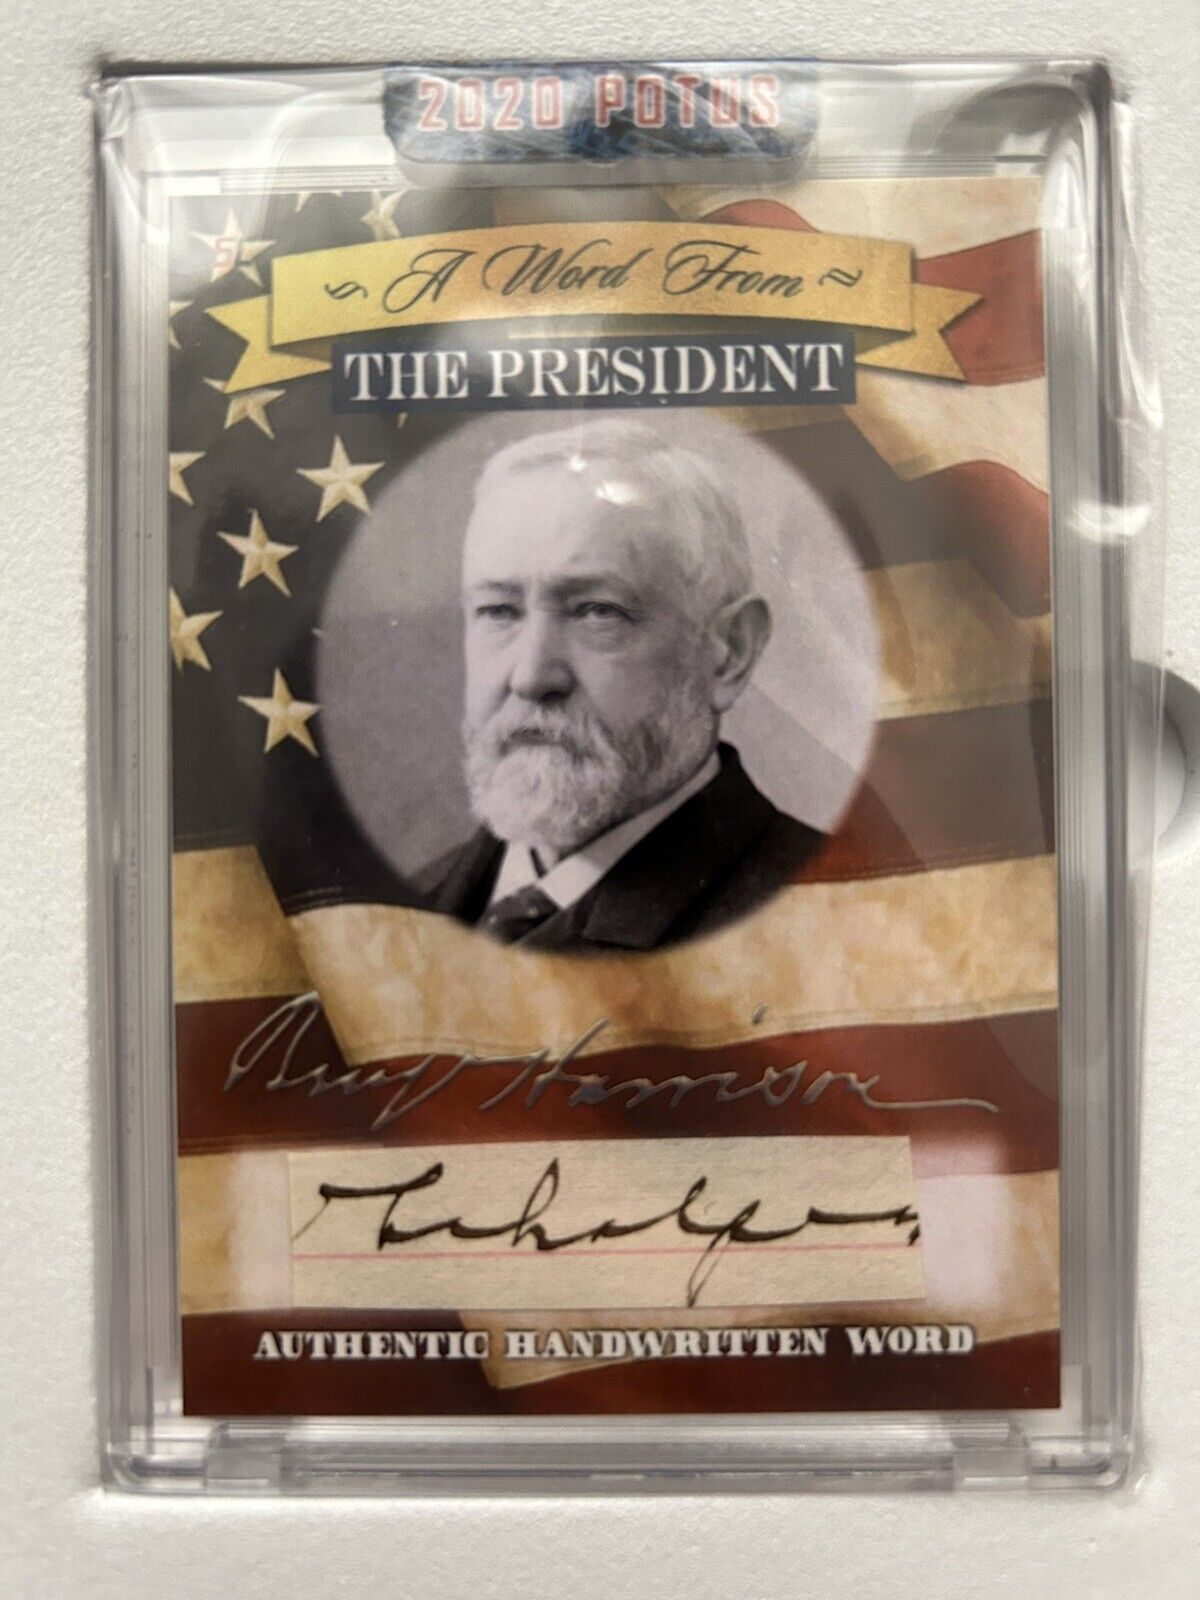 2020 potus a word from the president Benjamin Harrison With Box